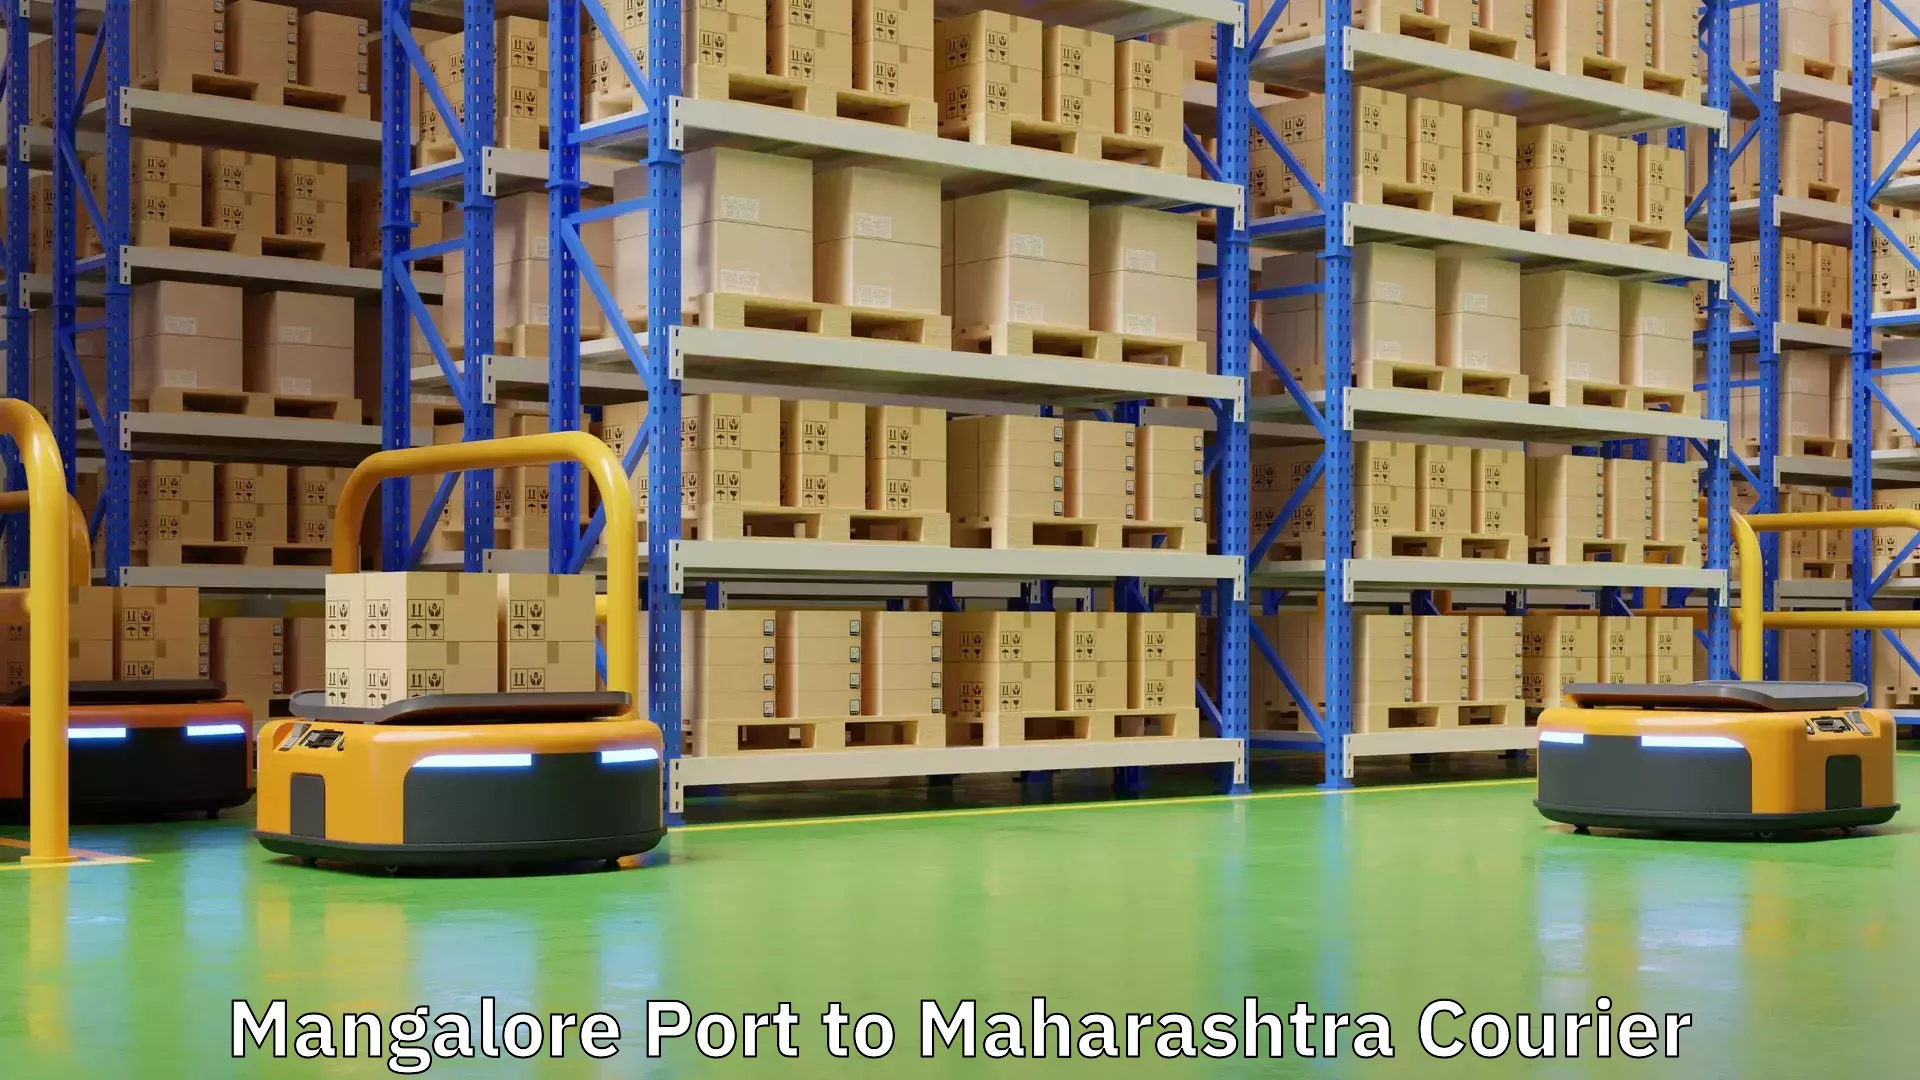 Round-the-clock parcel delivery Mangalore Port to Maharashtra